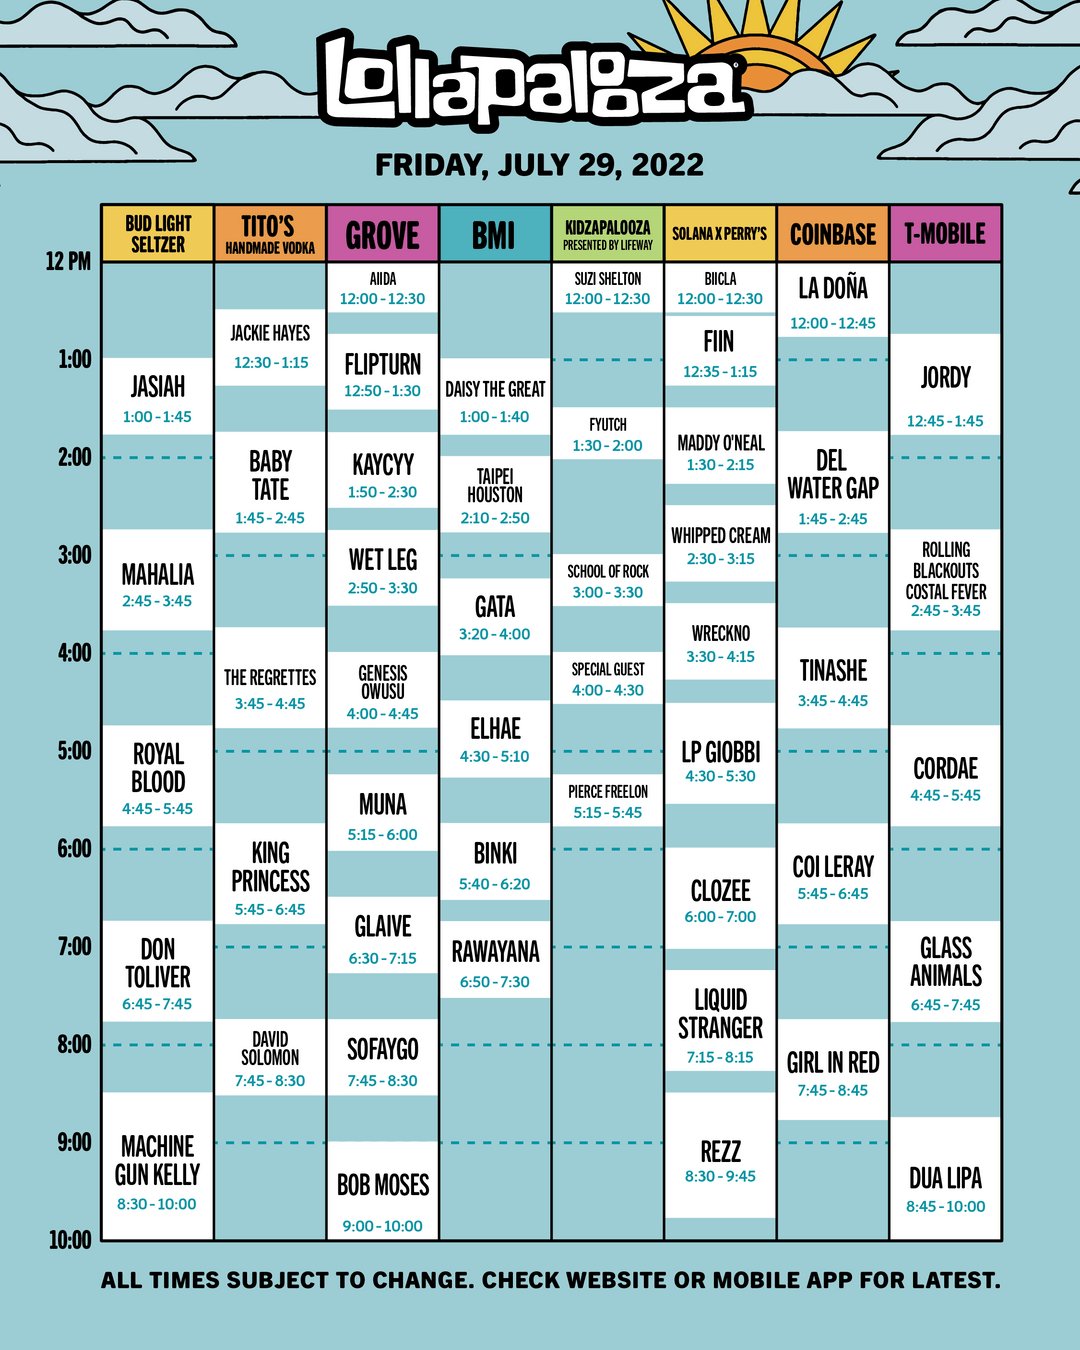 2022 Lollapalooza Schedule Announced 2